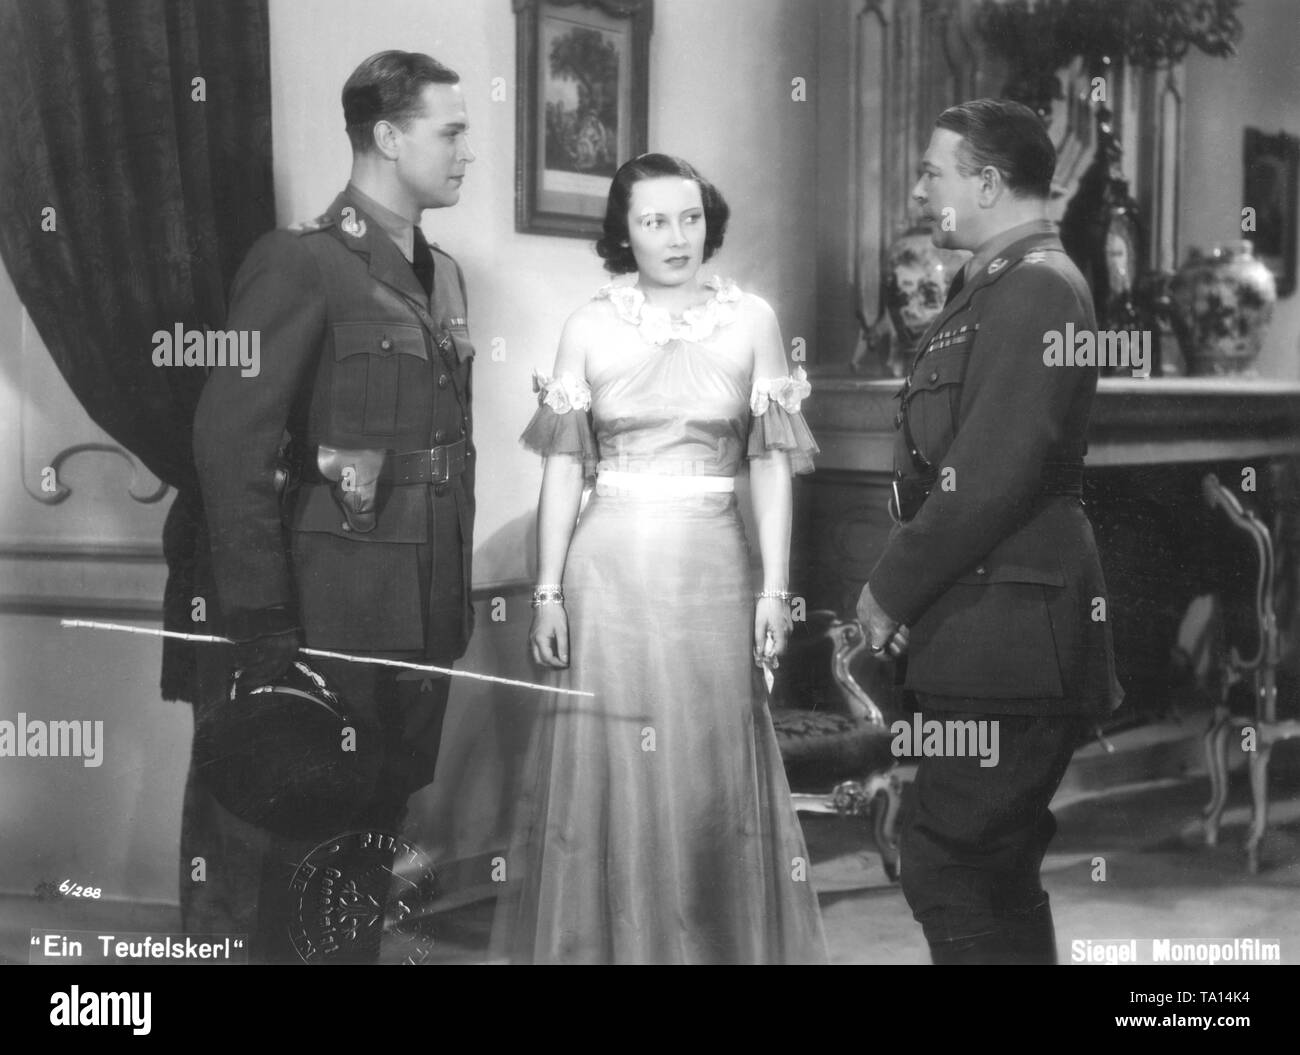 Gustav Froehlich as Lieutenant Bobby Tompson, Lida Baarova as the young widow Lady Milton and Georg Alexander as Colonel Hallifax in 'A Devil of a Fellow' directed by Georg Jacoby, based on a script by Paul Sugar. Stock Photo